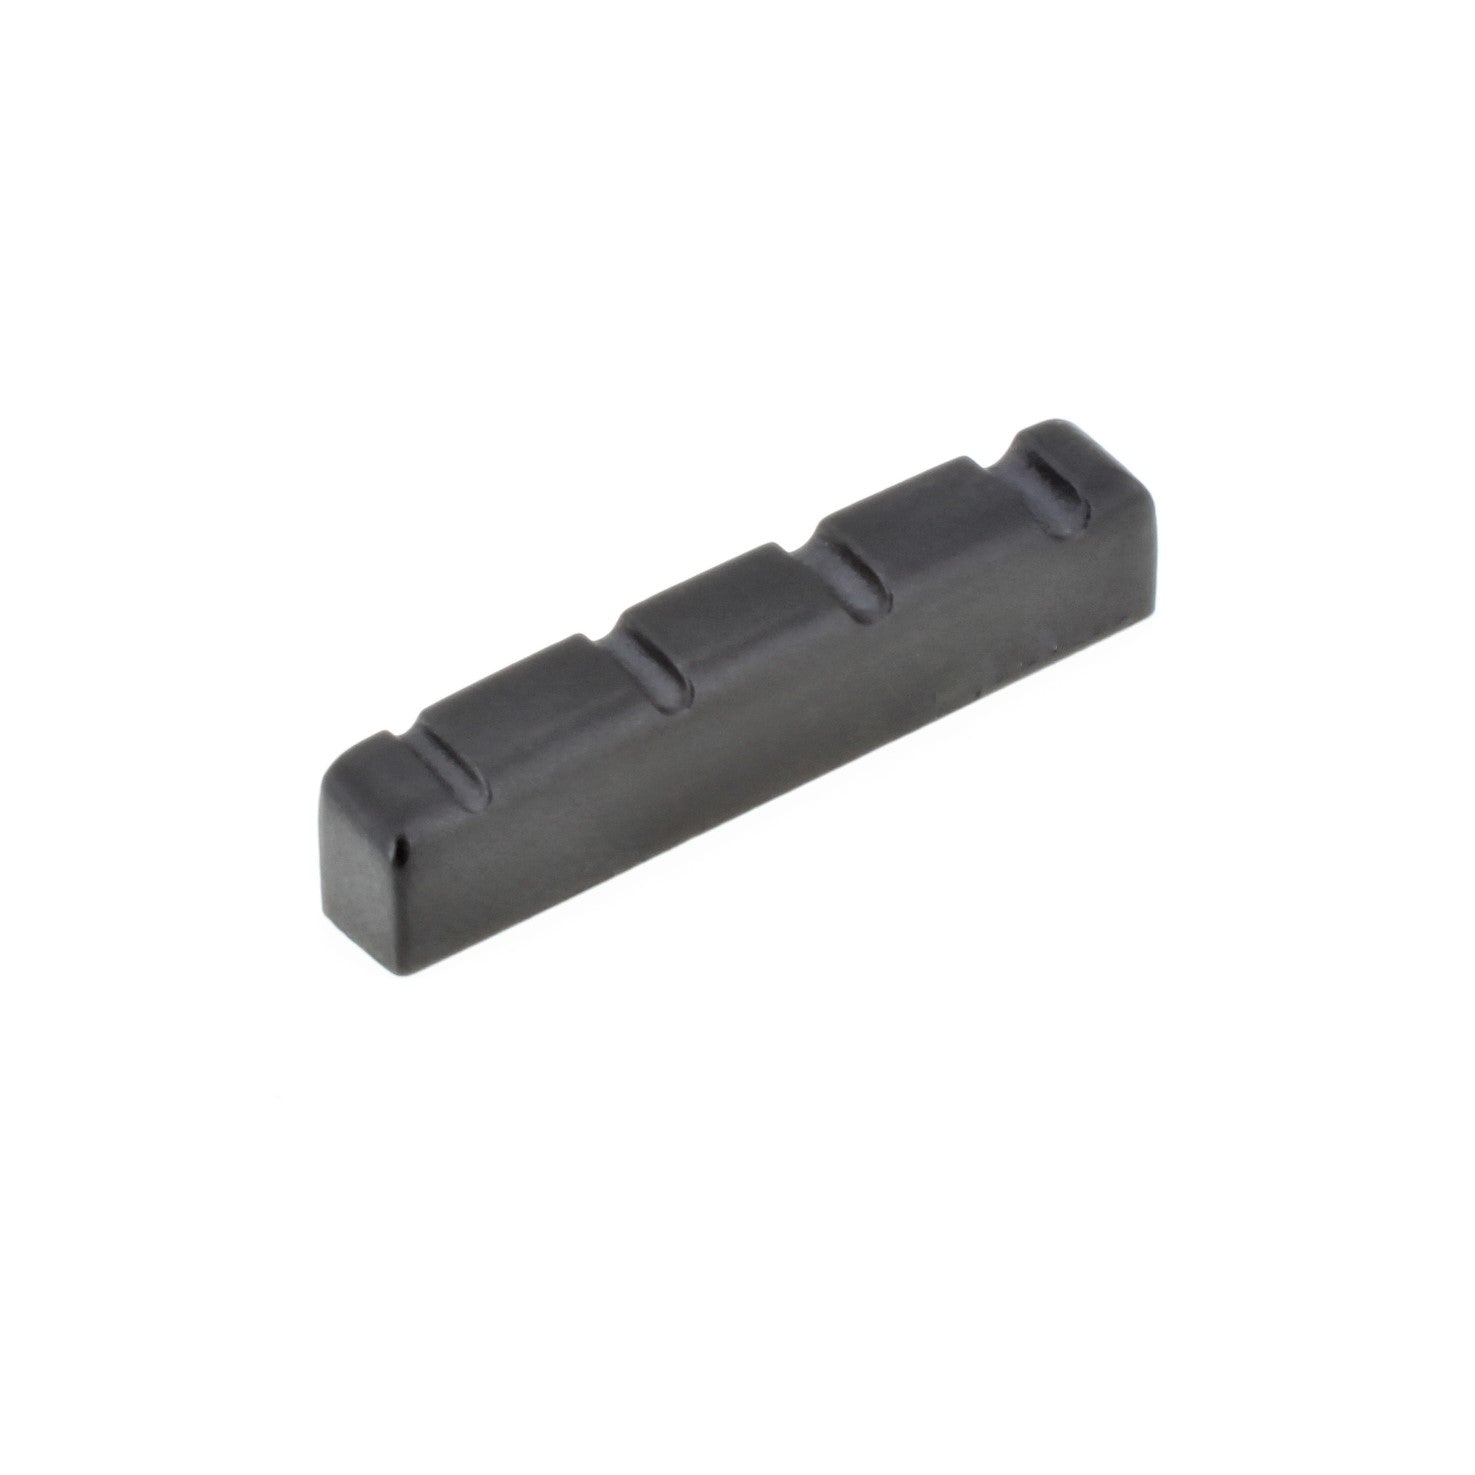 Model 1242-00 Nut Slotted L42.00mm